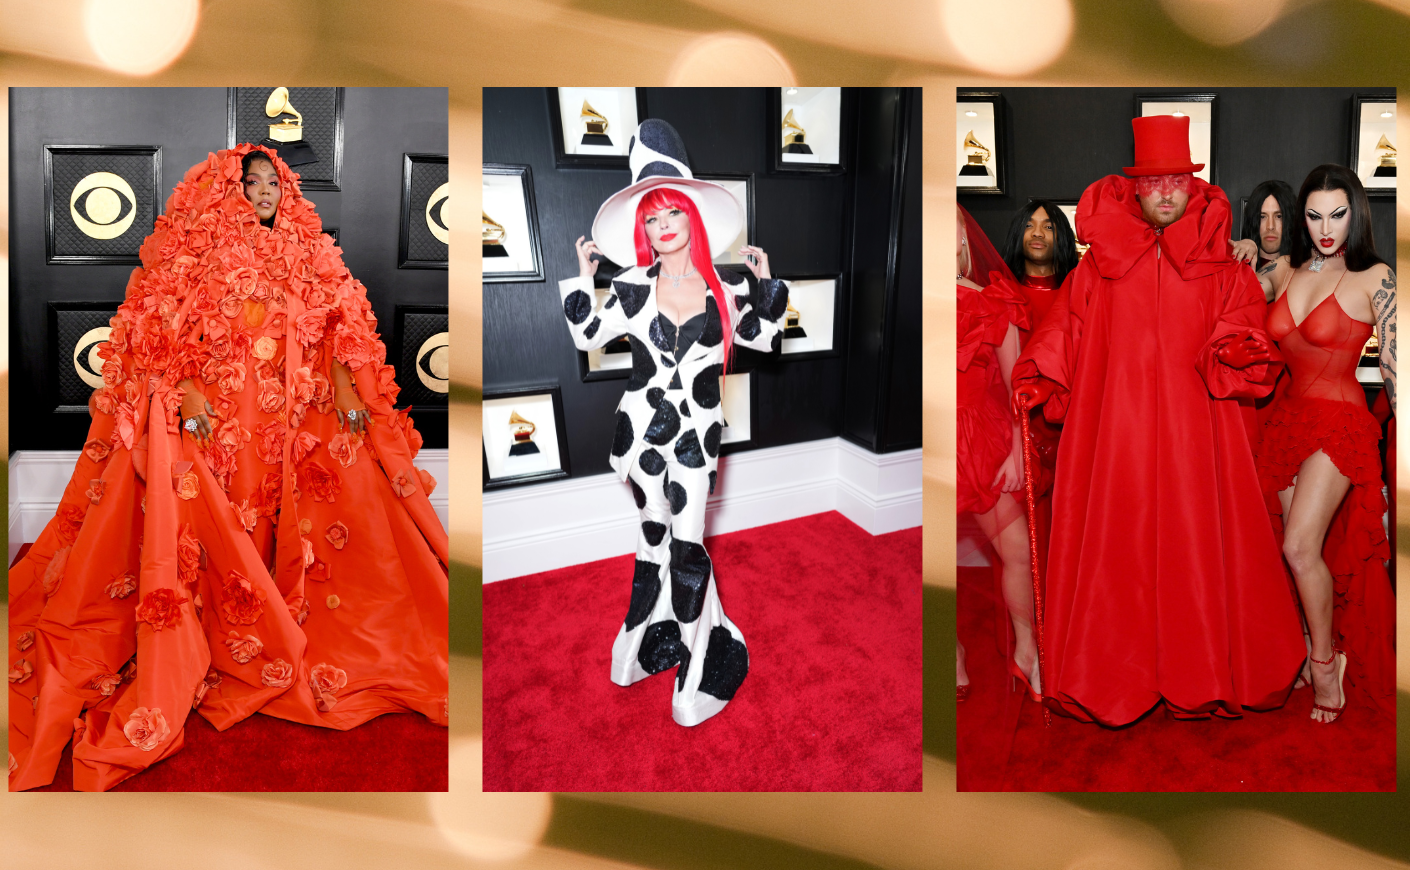 Lizzo, Shania Twain, and Sam Smith at the GRAMMYs red carpet